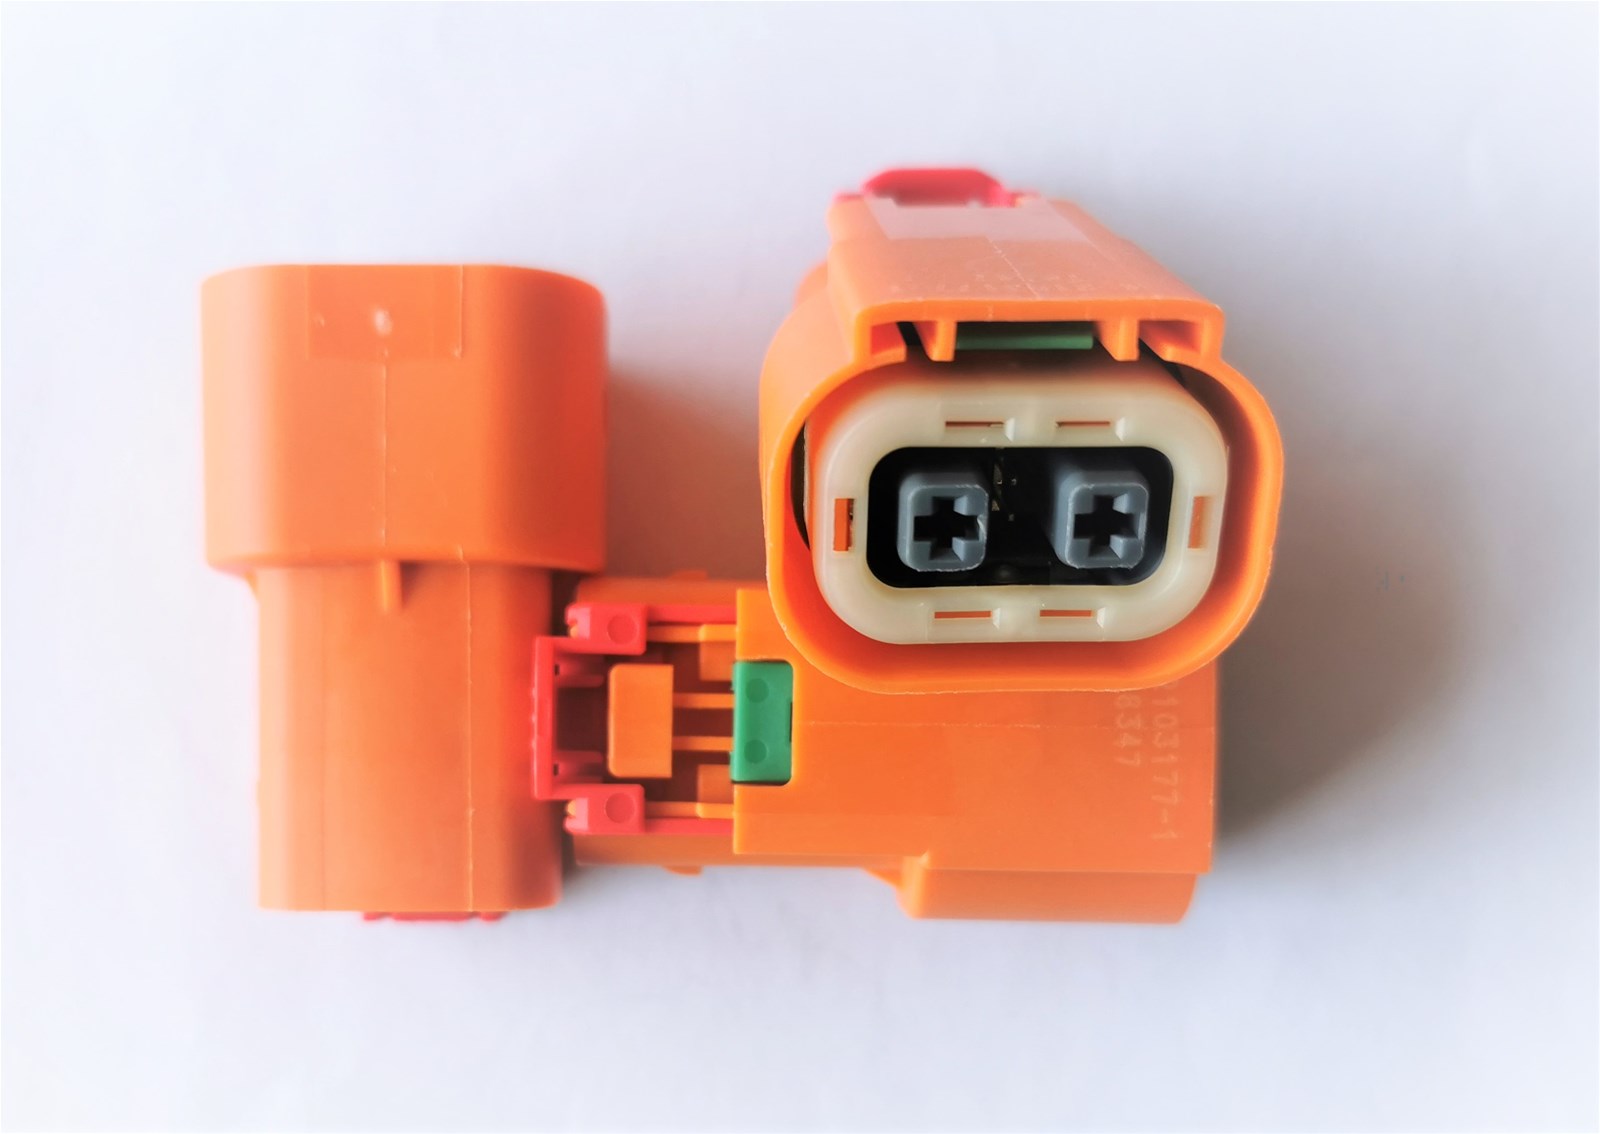 Connector for automobilebattery pack